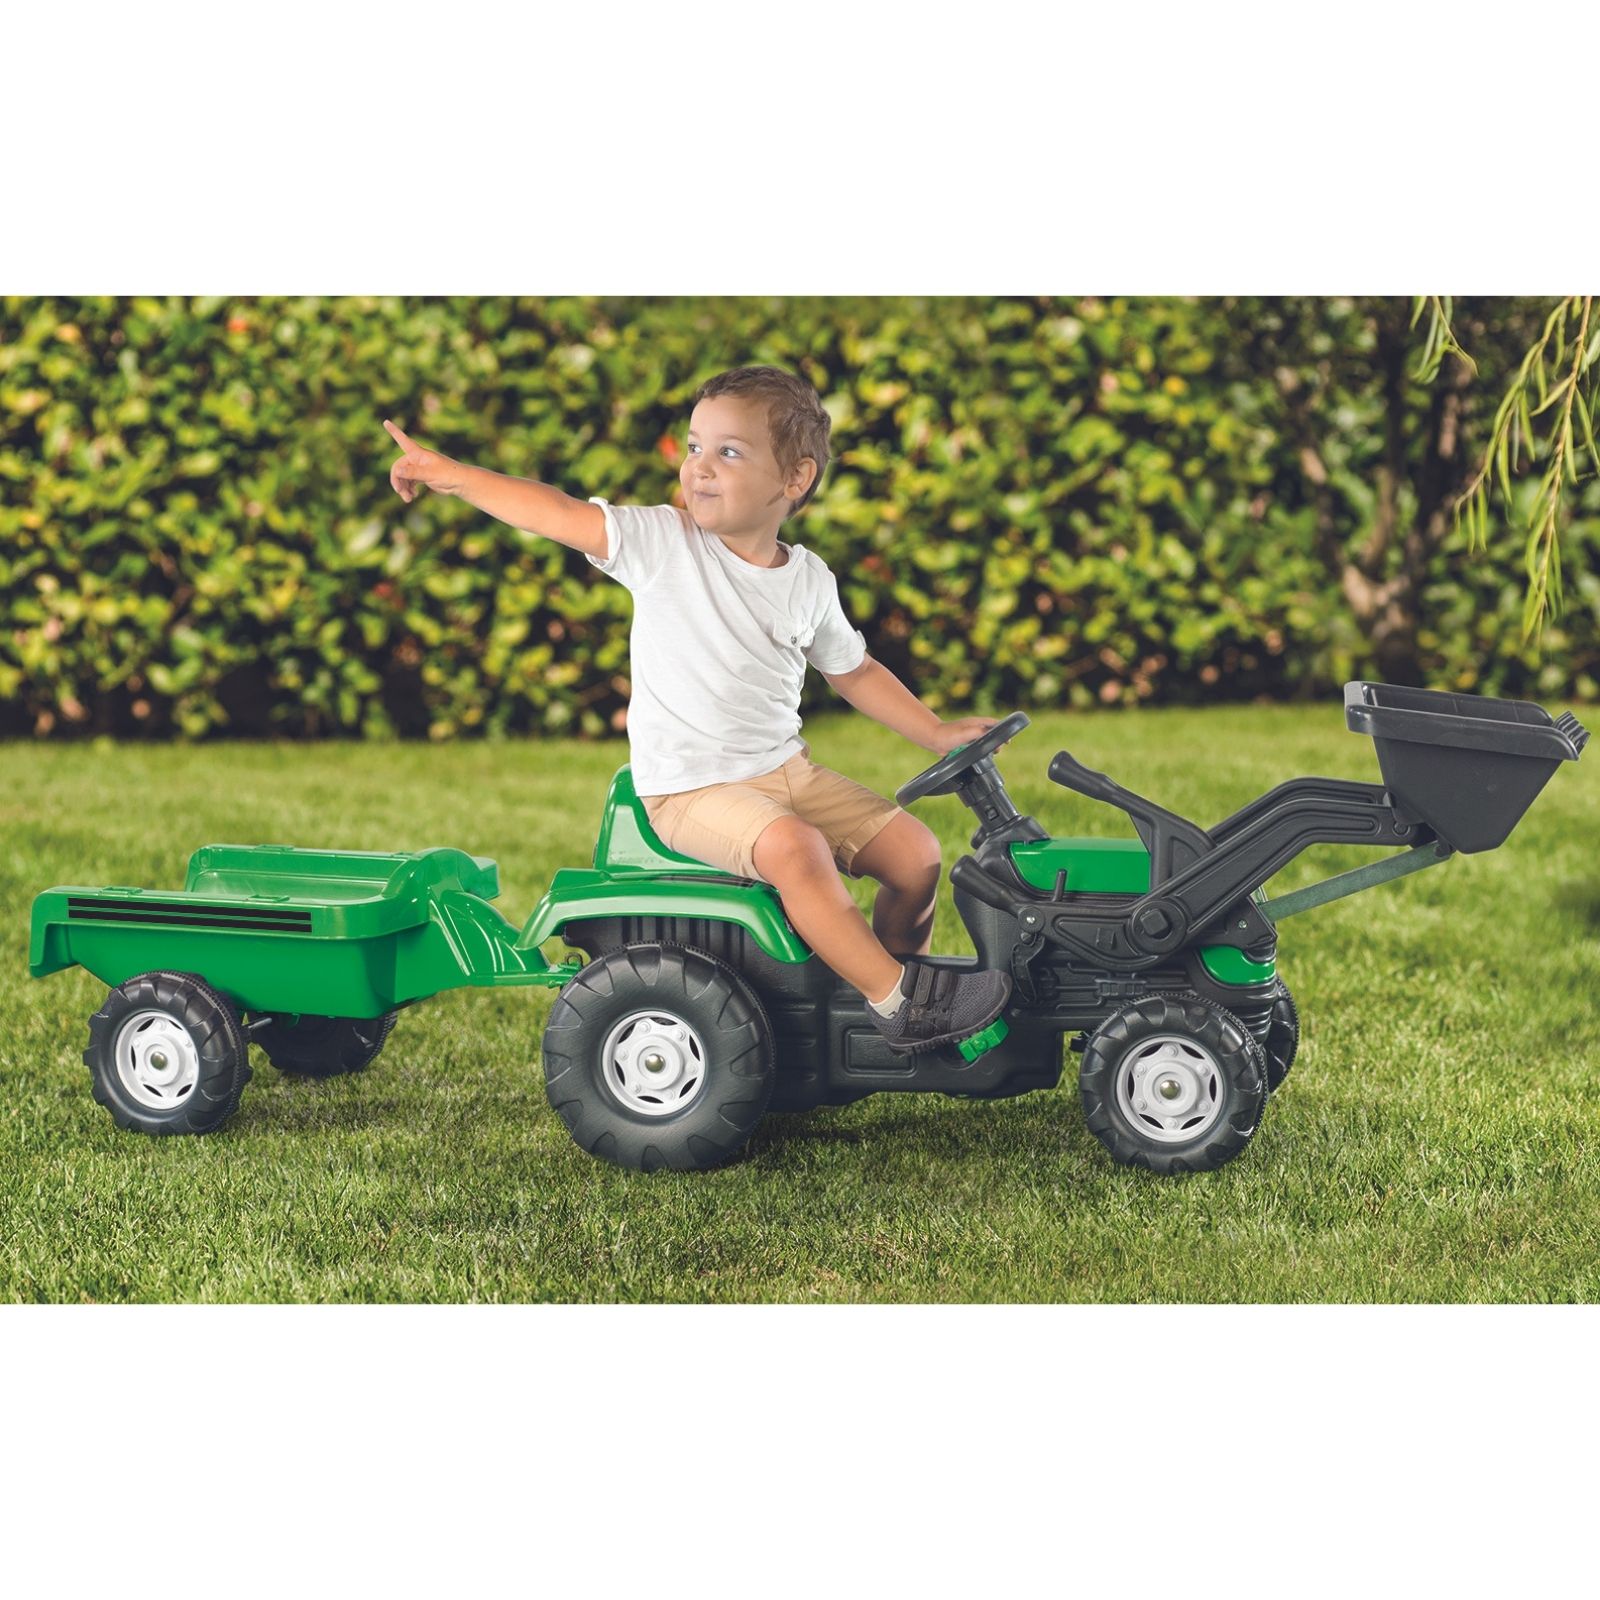 Ranchero Pedal Operated Tractor With Trailer & Excavator - Green (36 Months+)